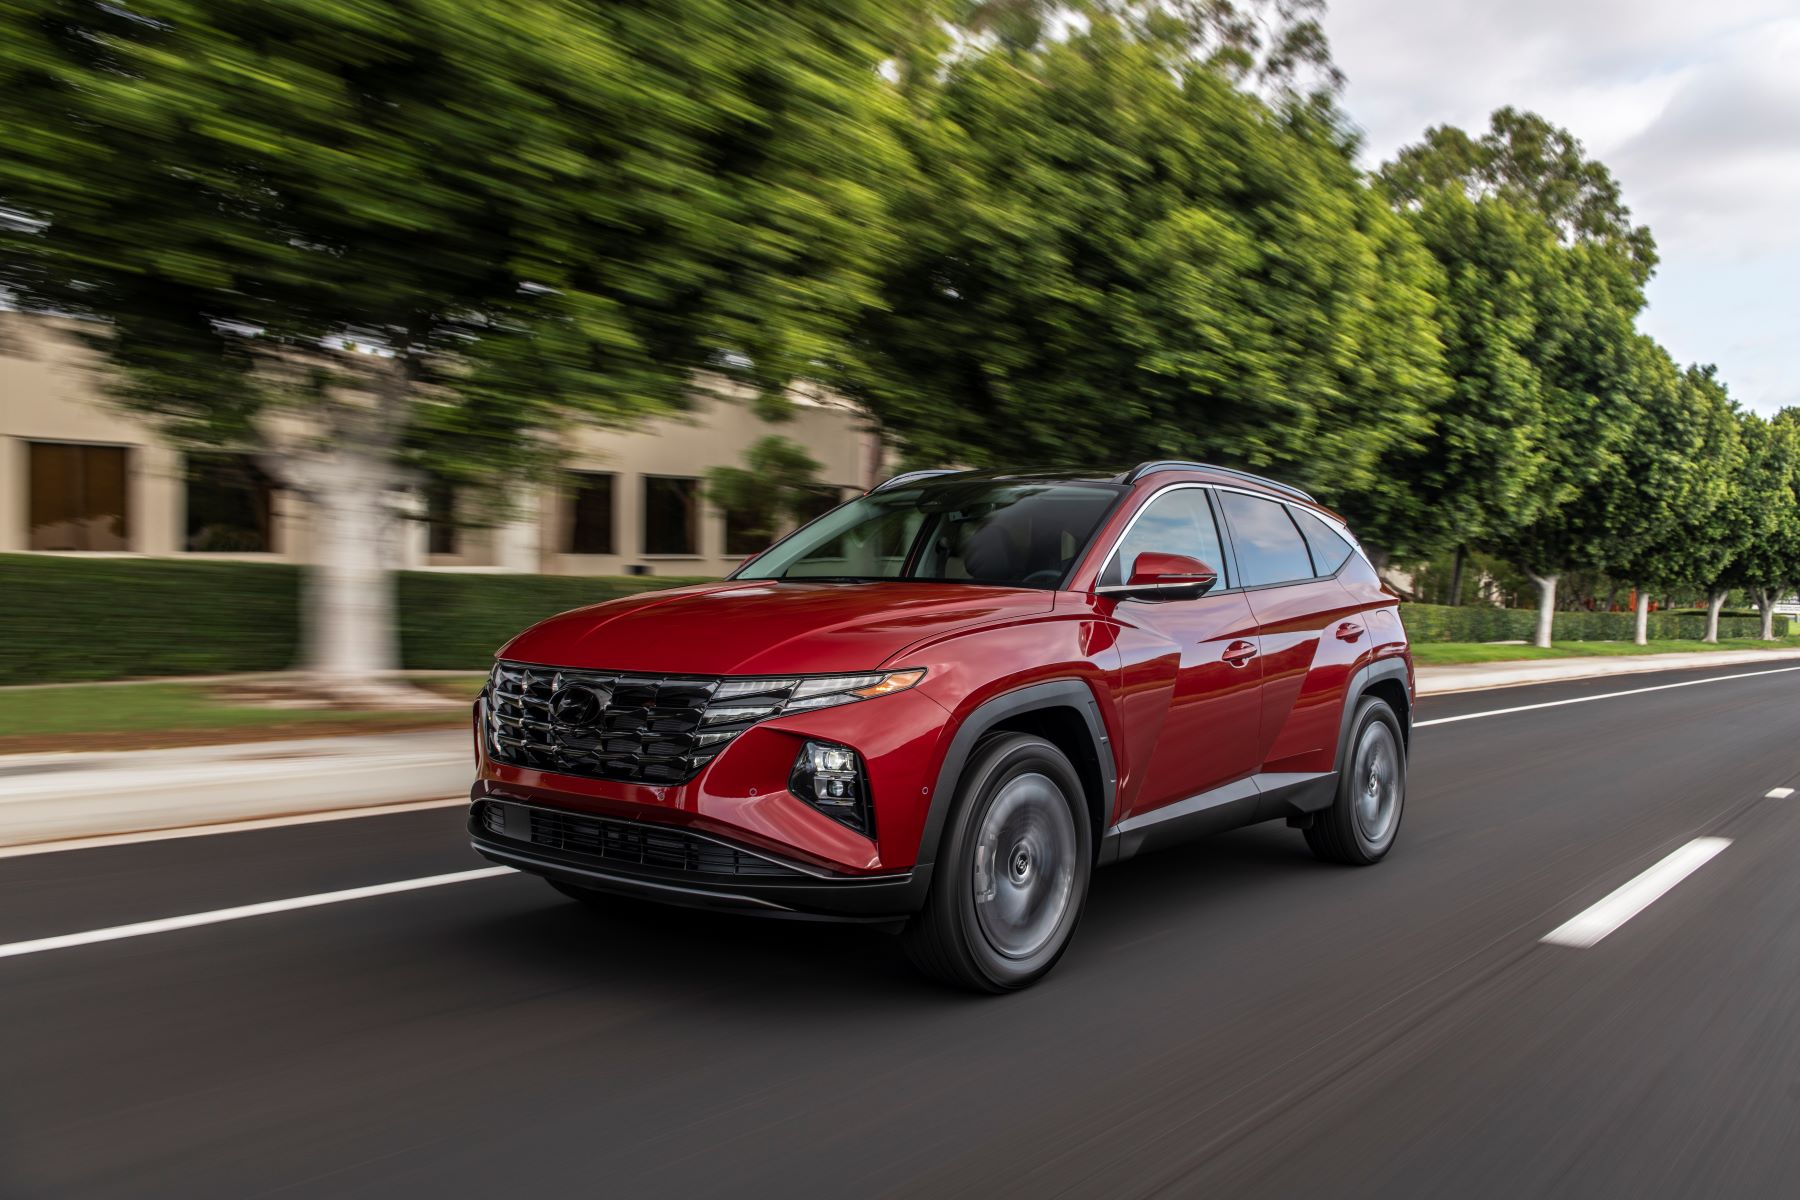 A red 2023 Hyundai Tucson compact SUV model driving down a suburb street lined by trees